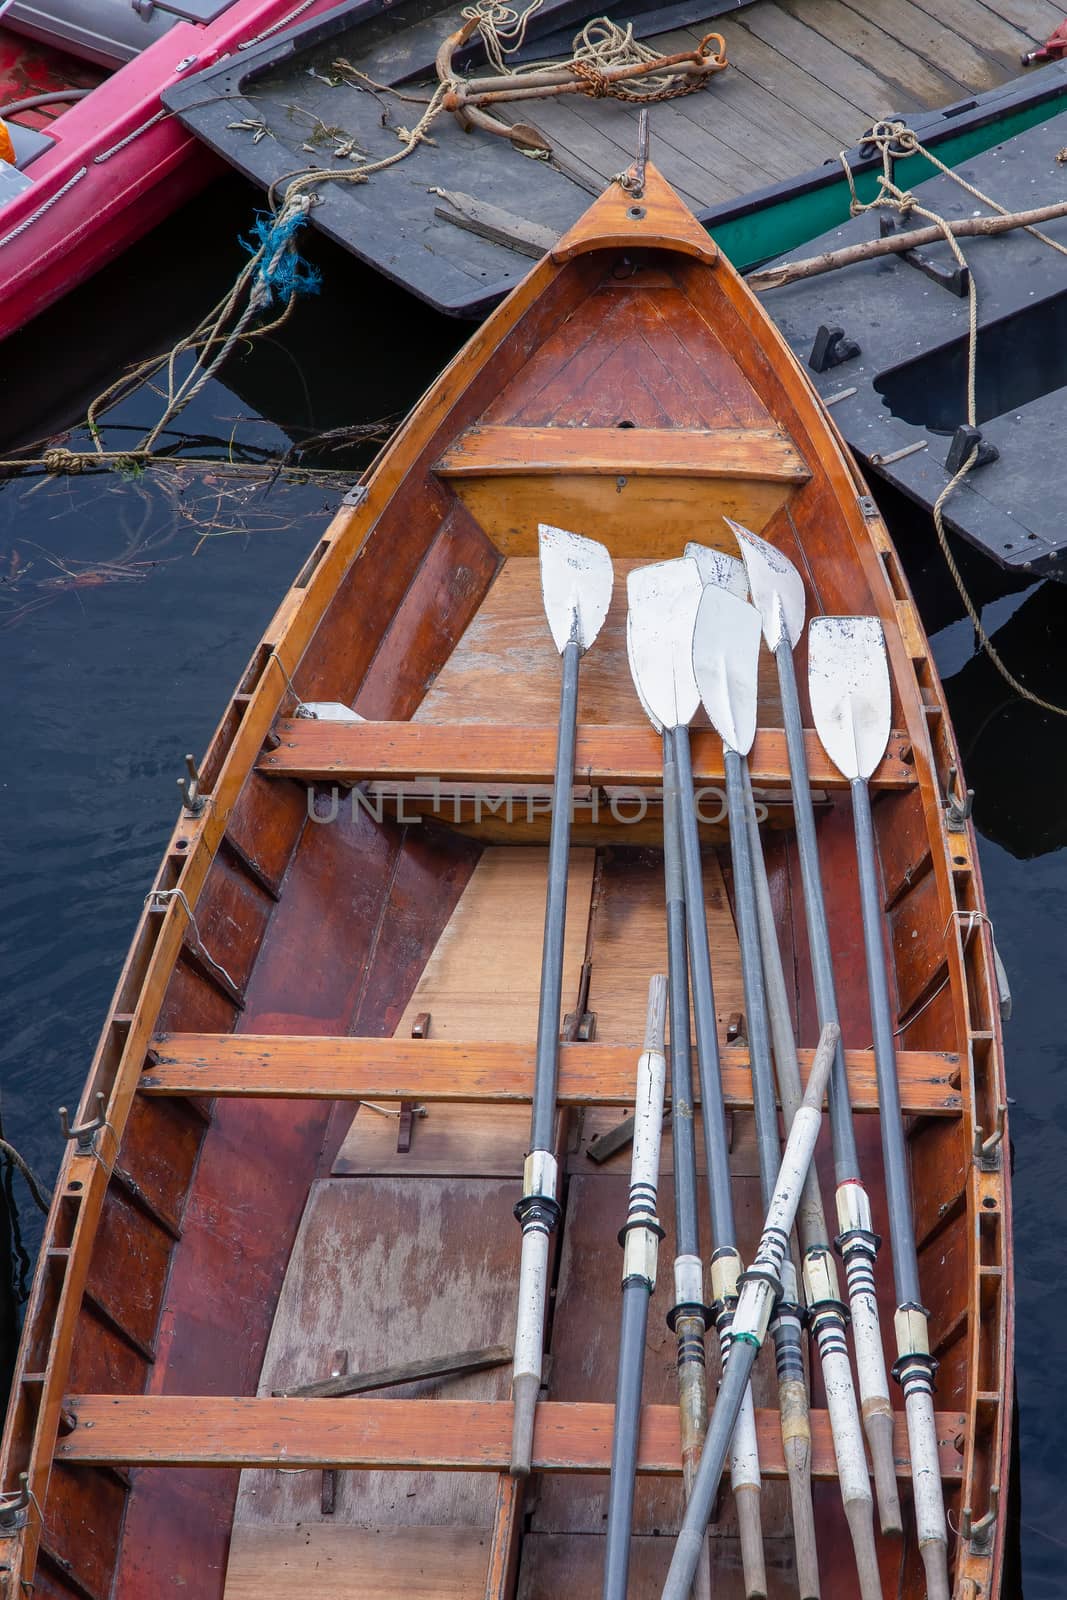 Wooden rowing boat for hire, moored on the River Thames, London, England by magicbones